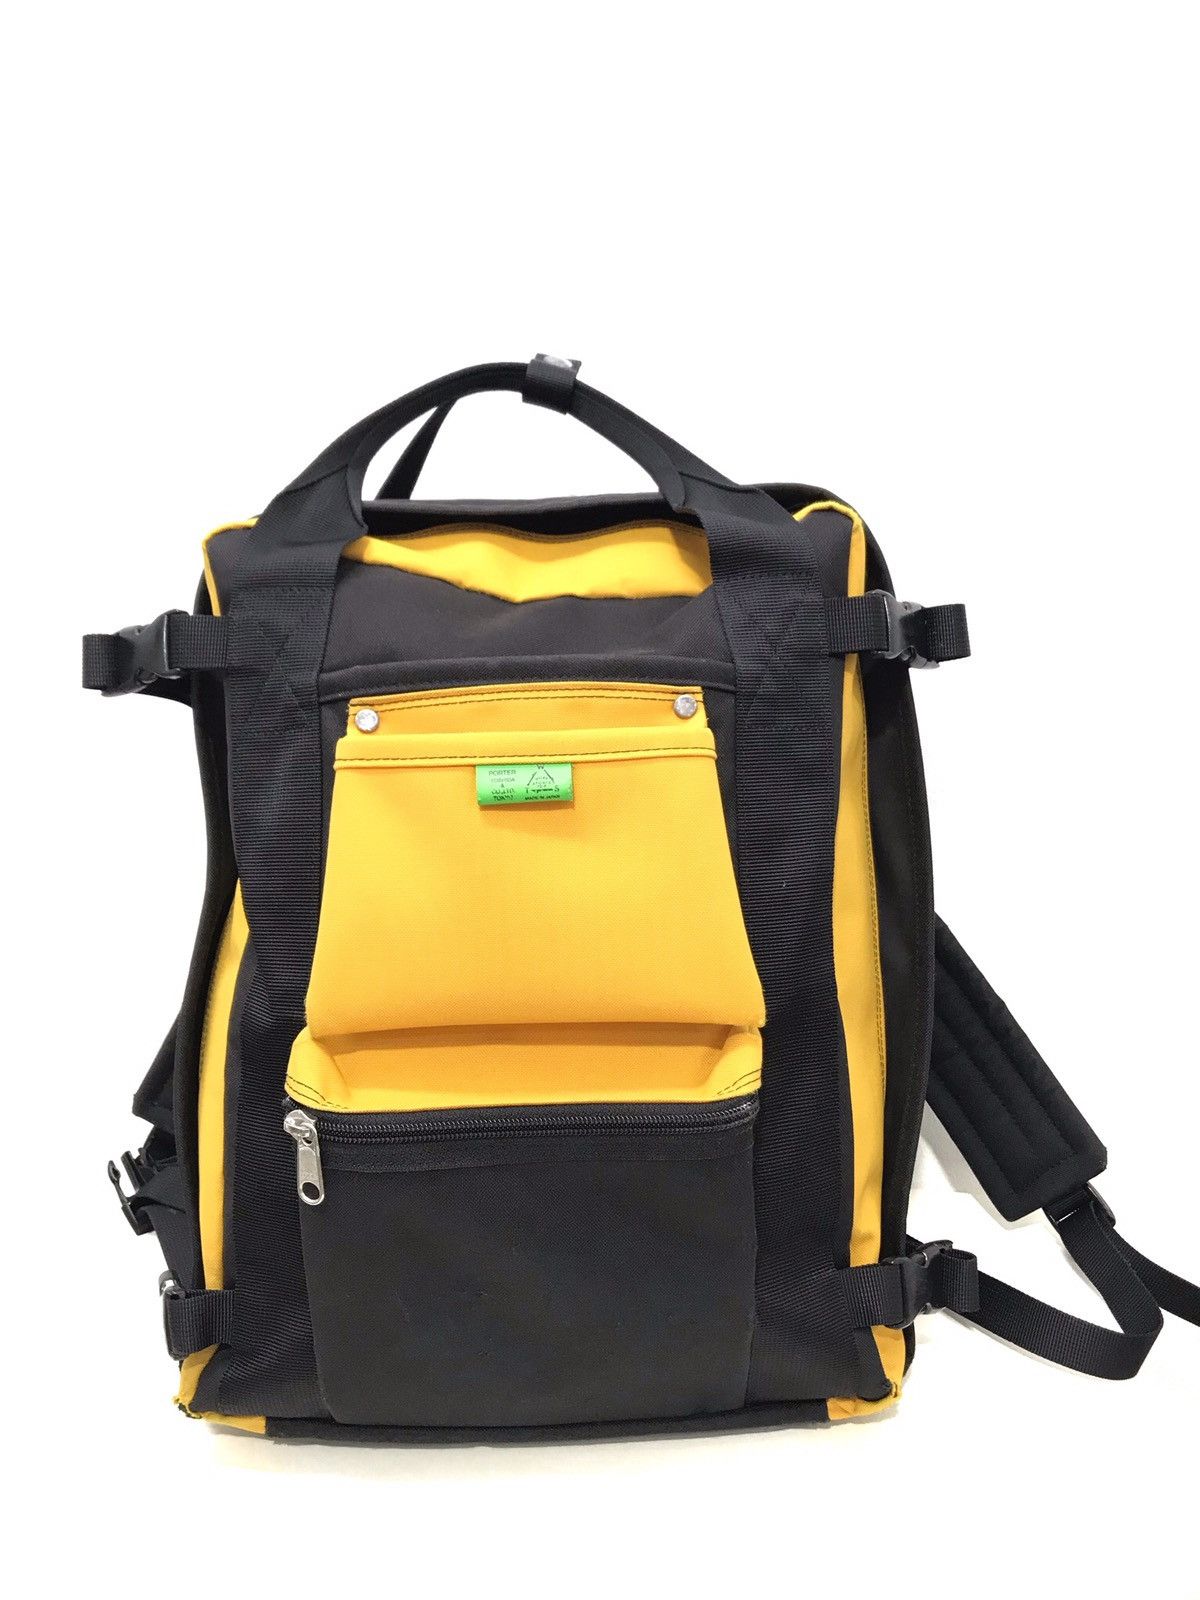 Pre-owned Backpack X Porter Union 2 Way Backpack Hand Carry In Black/yellow